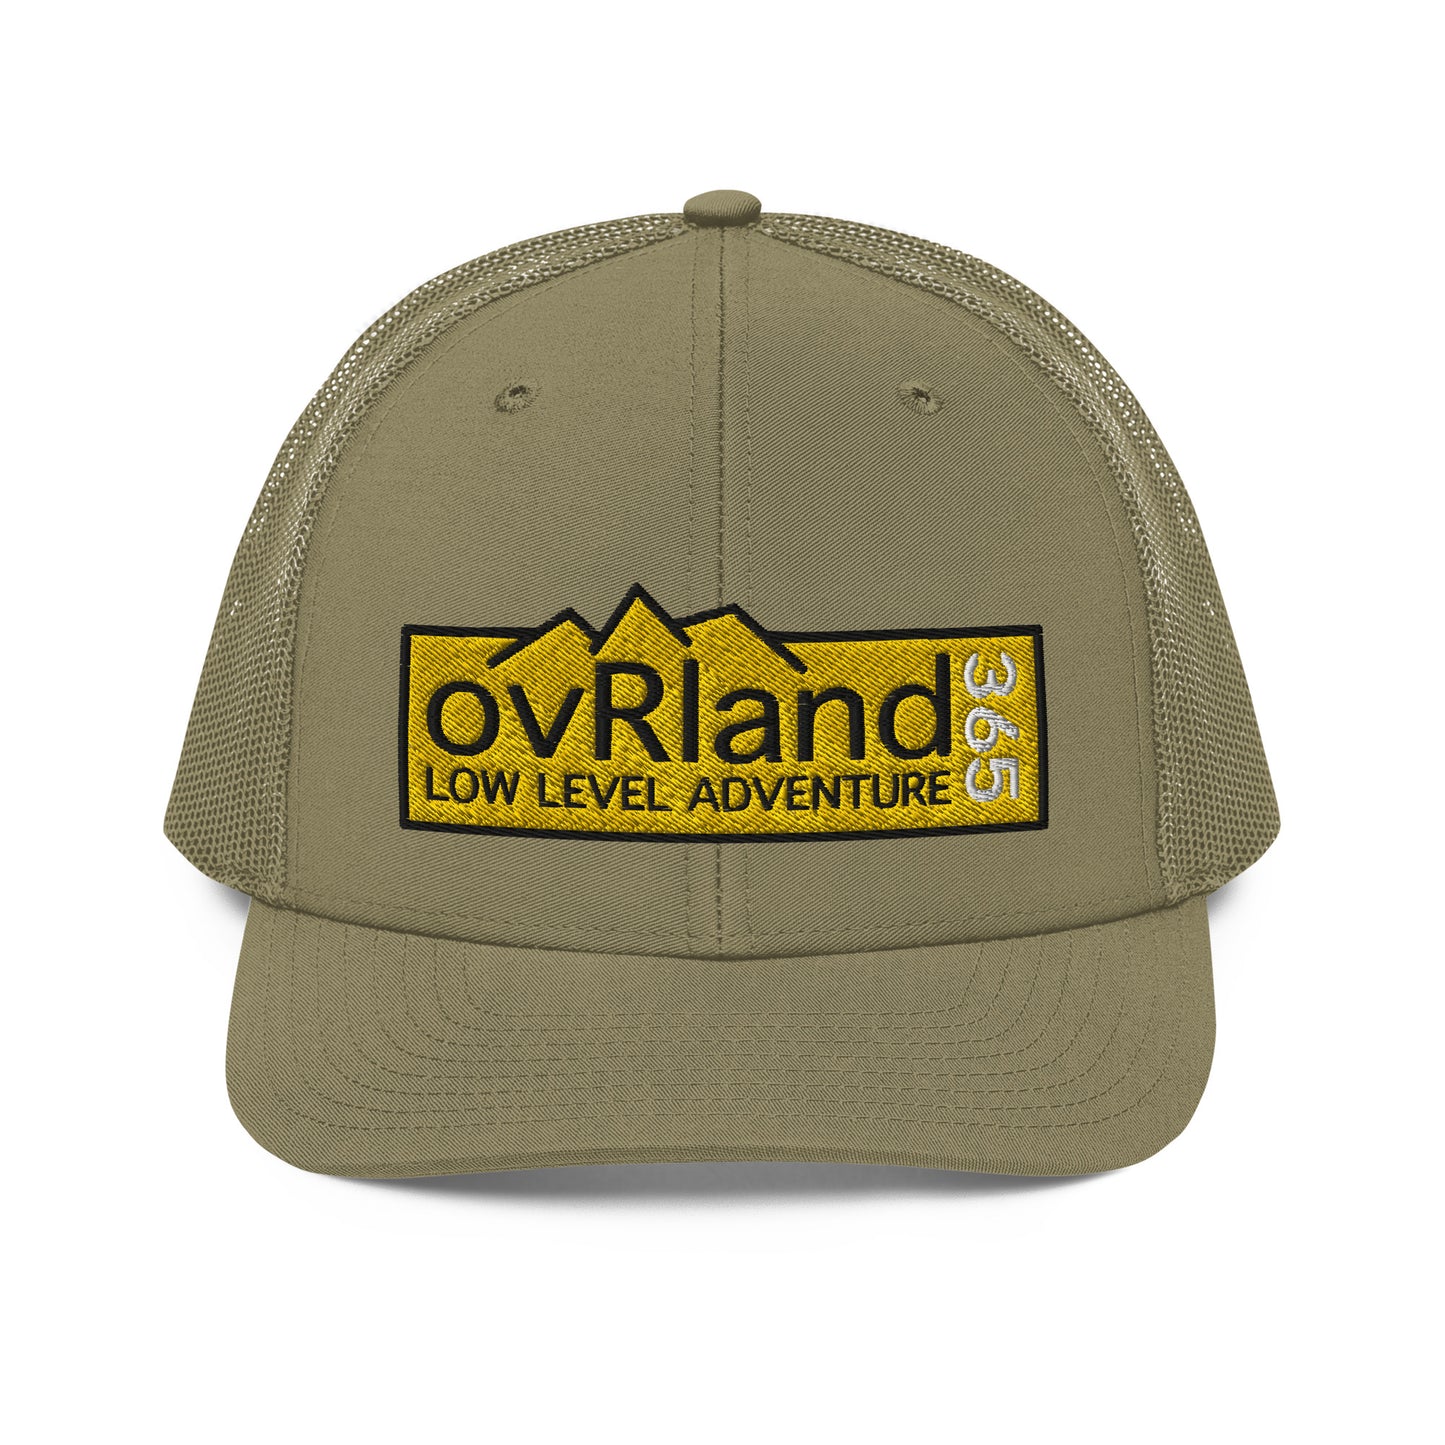 ovRland365 - Low Level Adventure overland hat. tan/tan front view. overland365.com